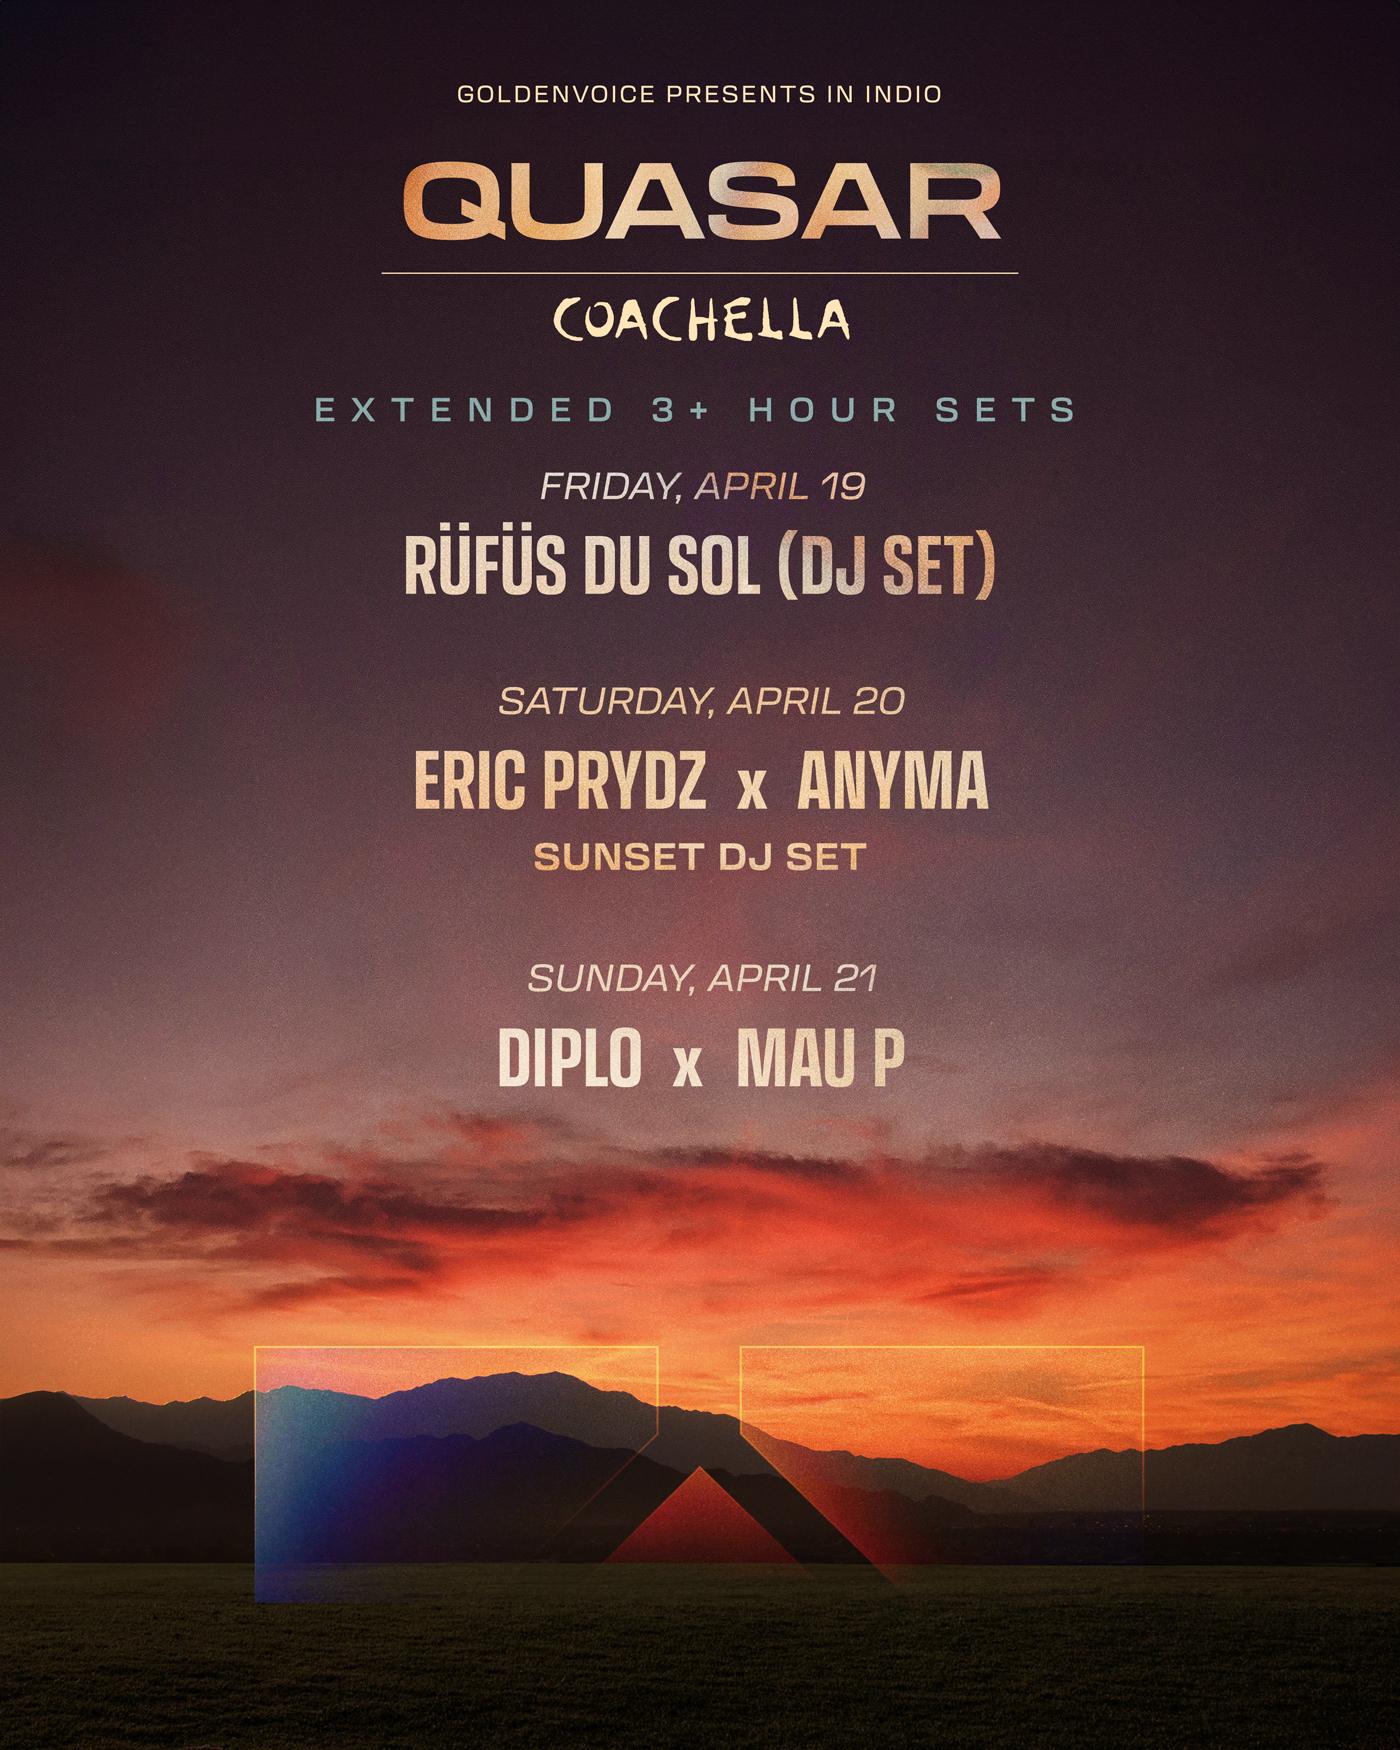 Quasar stage weekend two lineup